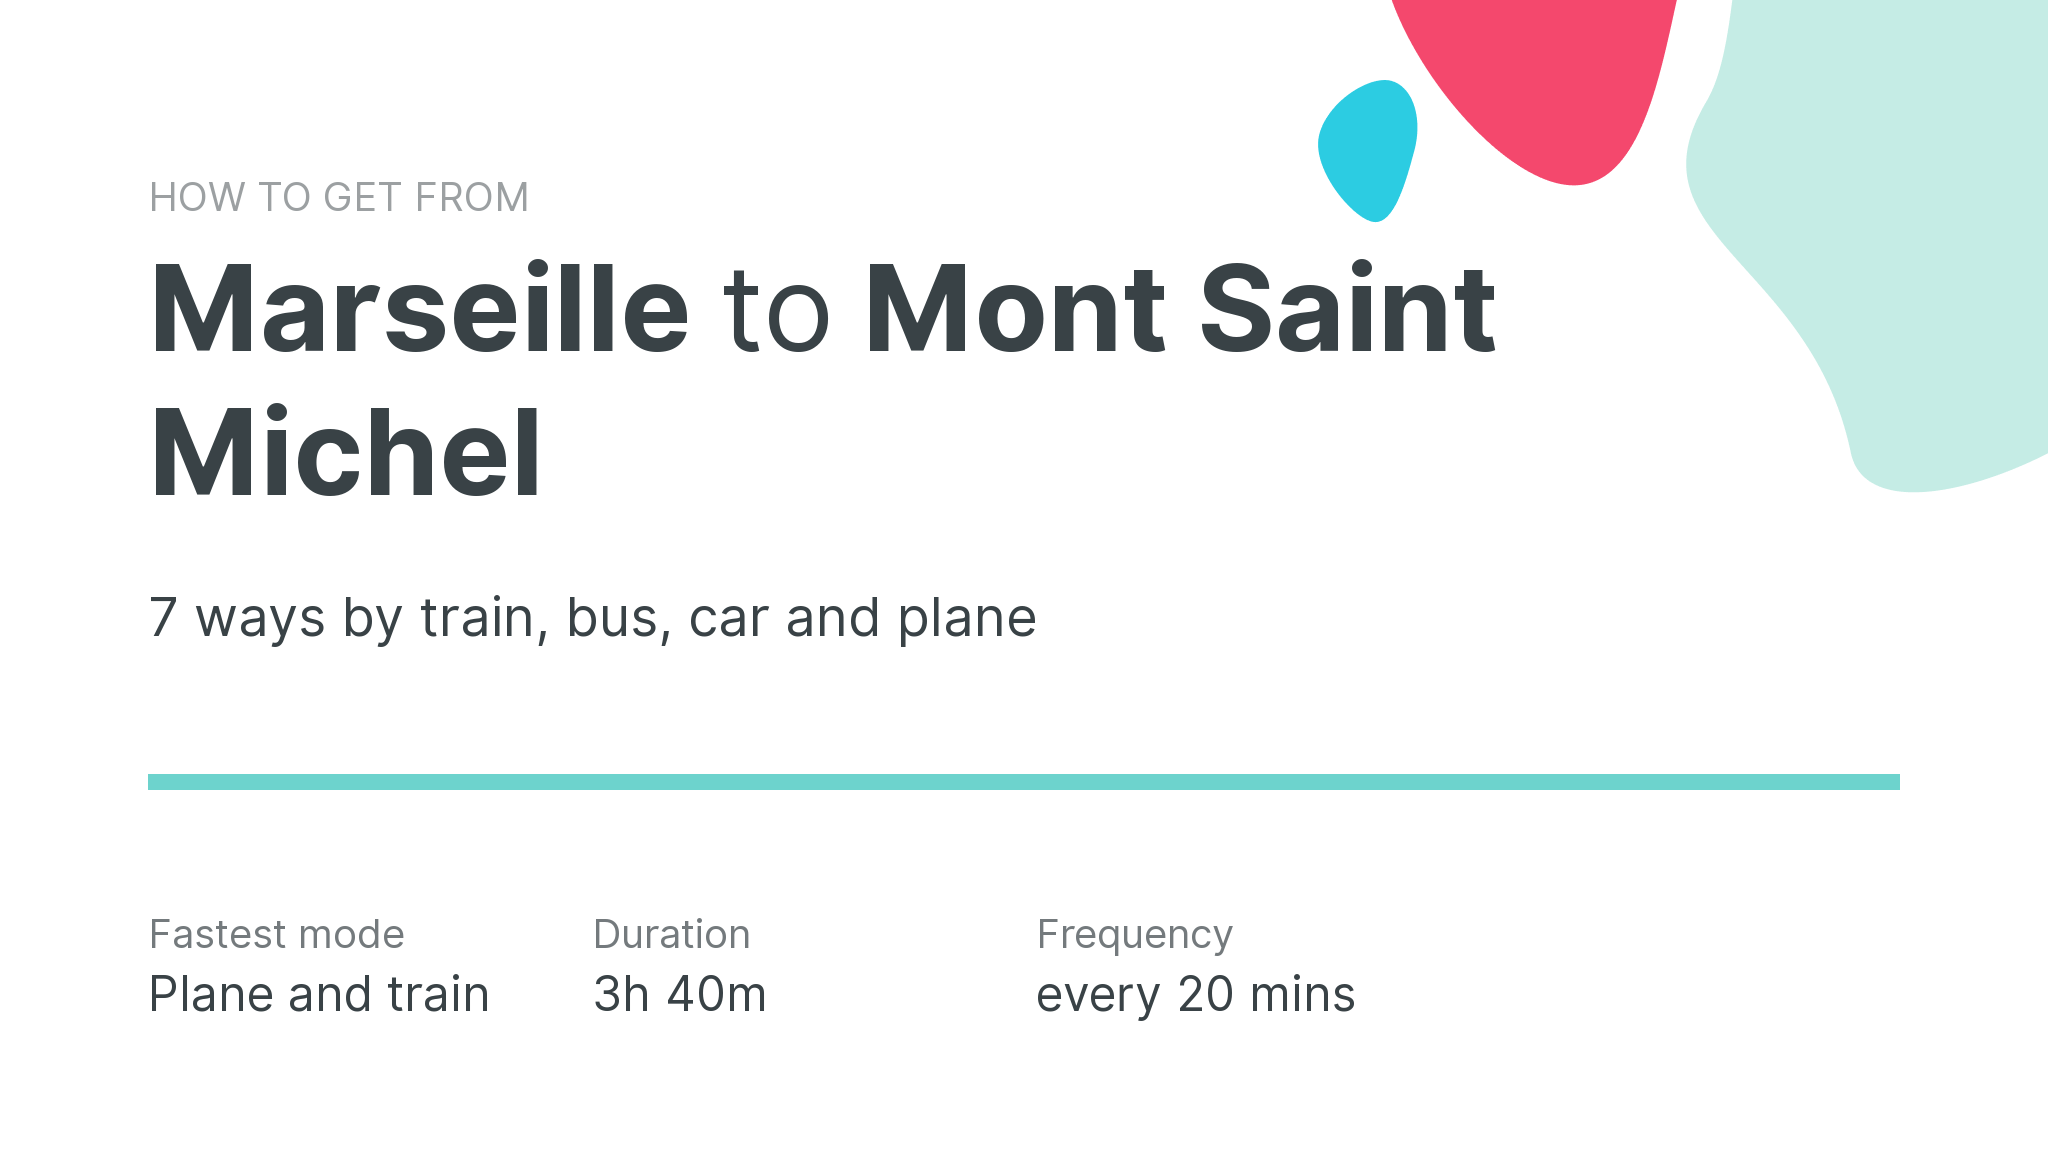 How do I get from Marseille to Mont Saint Michel